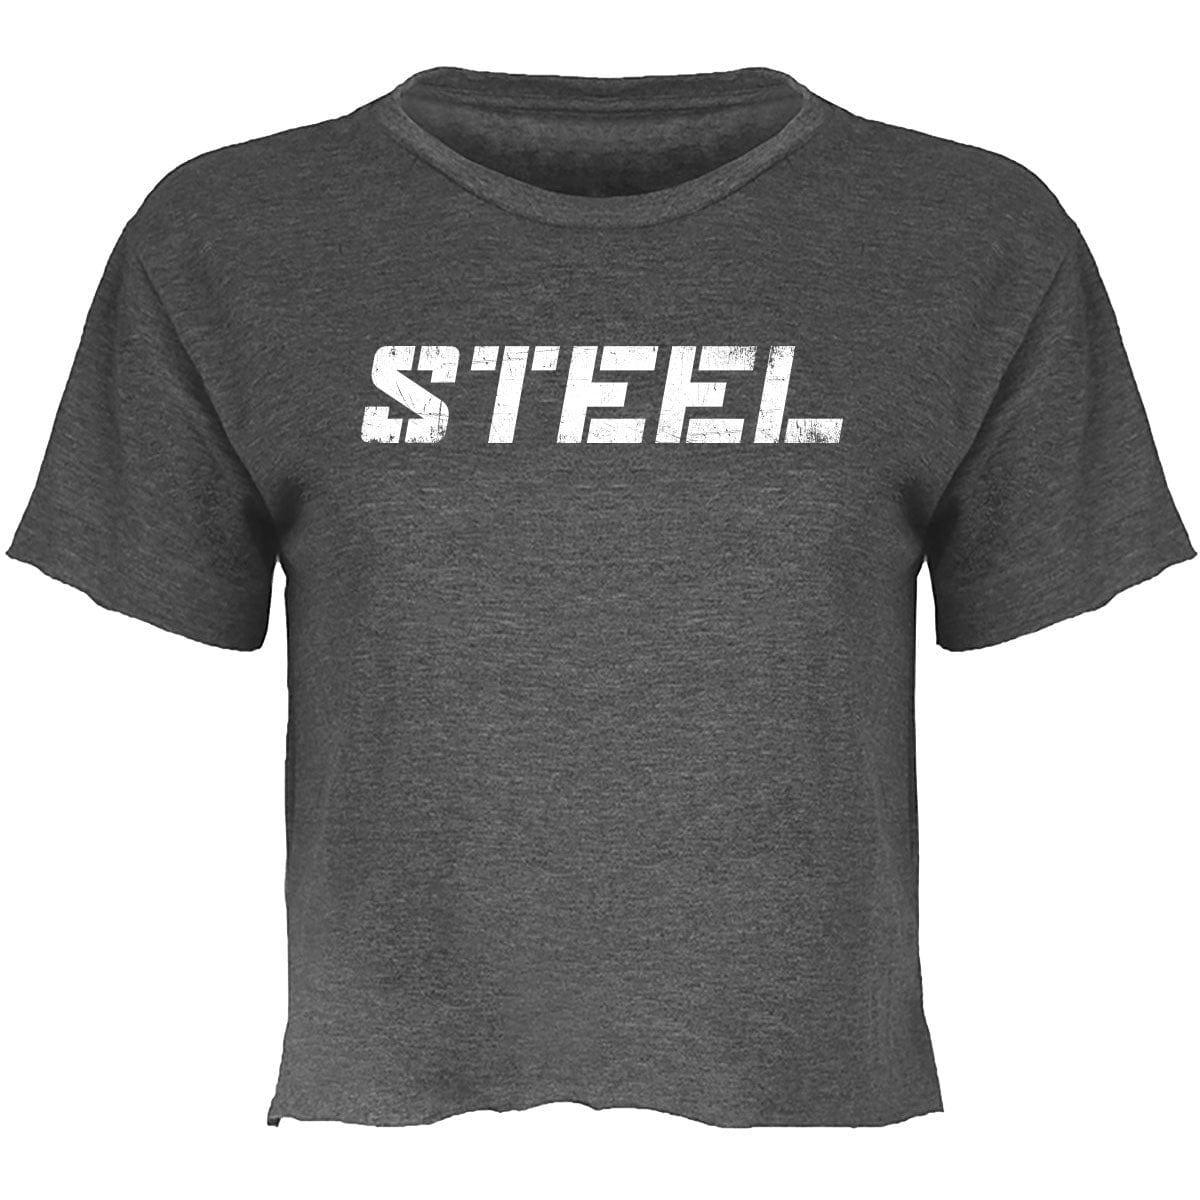 Steel Supplements White on Charcoal / XS Women's Everyday Crop